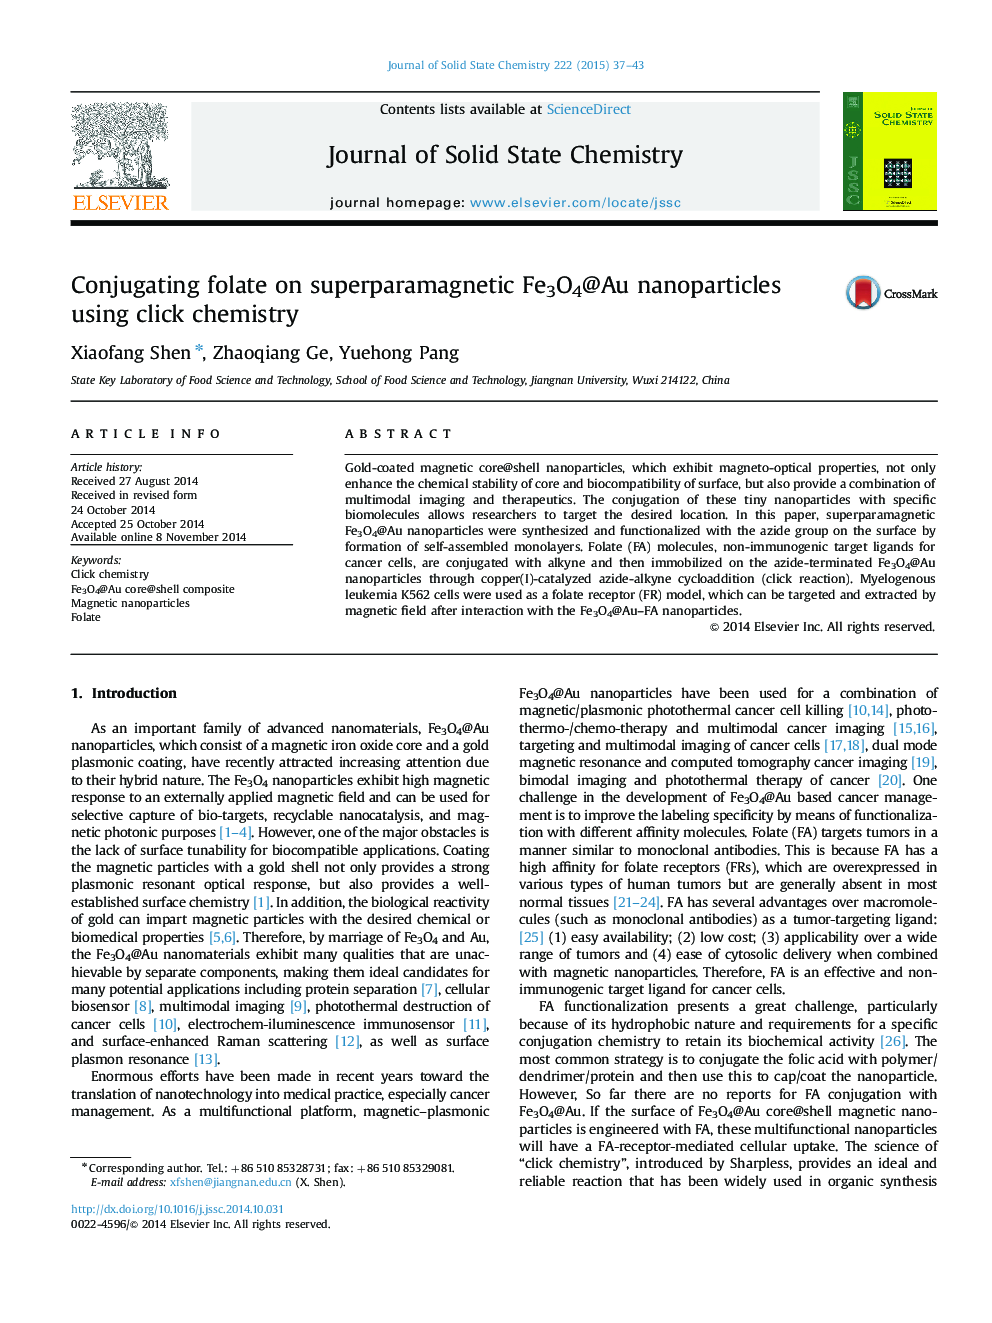 Conjugating folate on superparamagnetic Fe3O4@Au nanoparticles using click chemistry